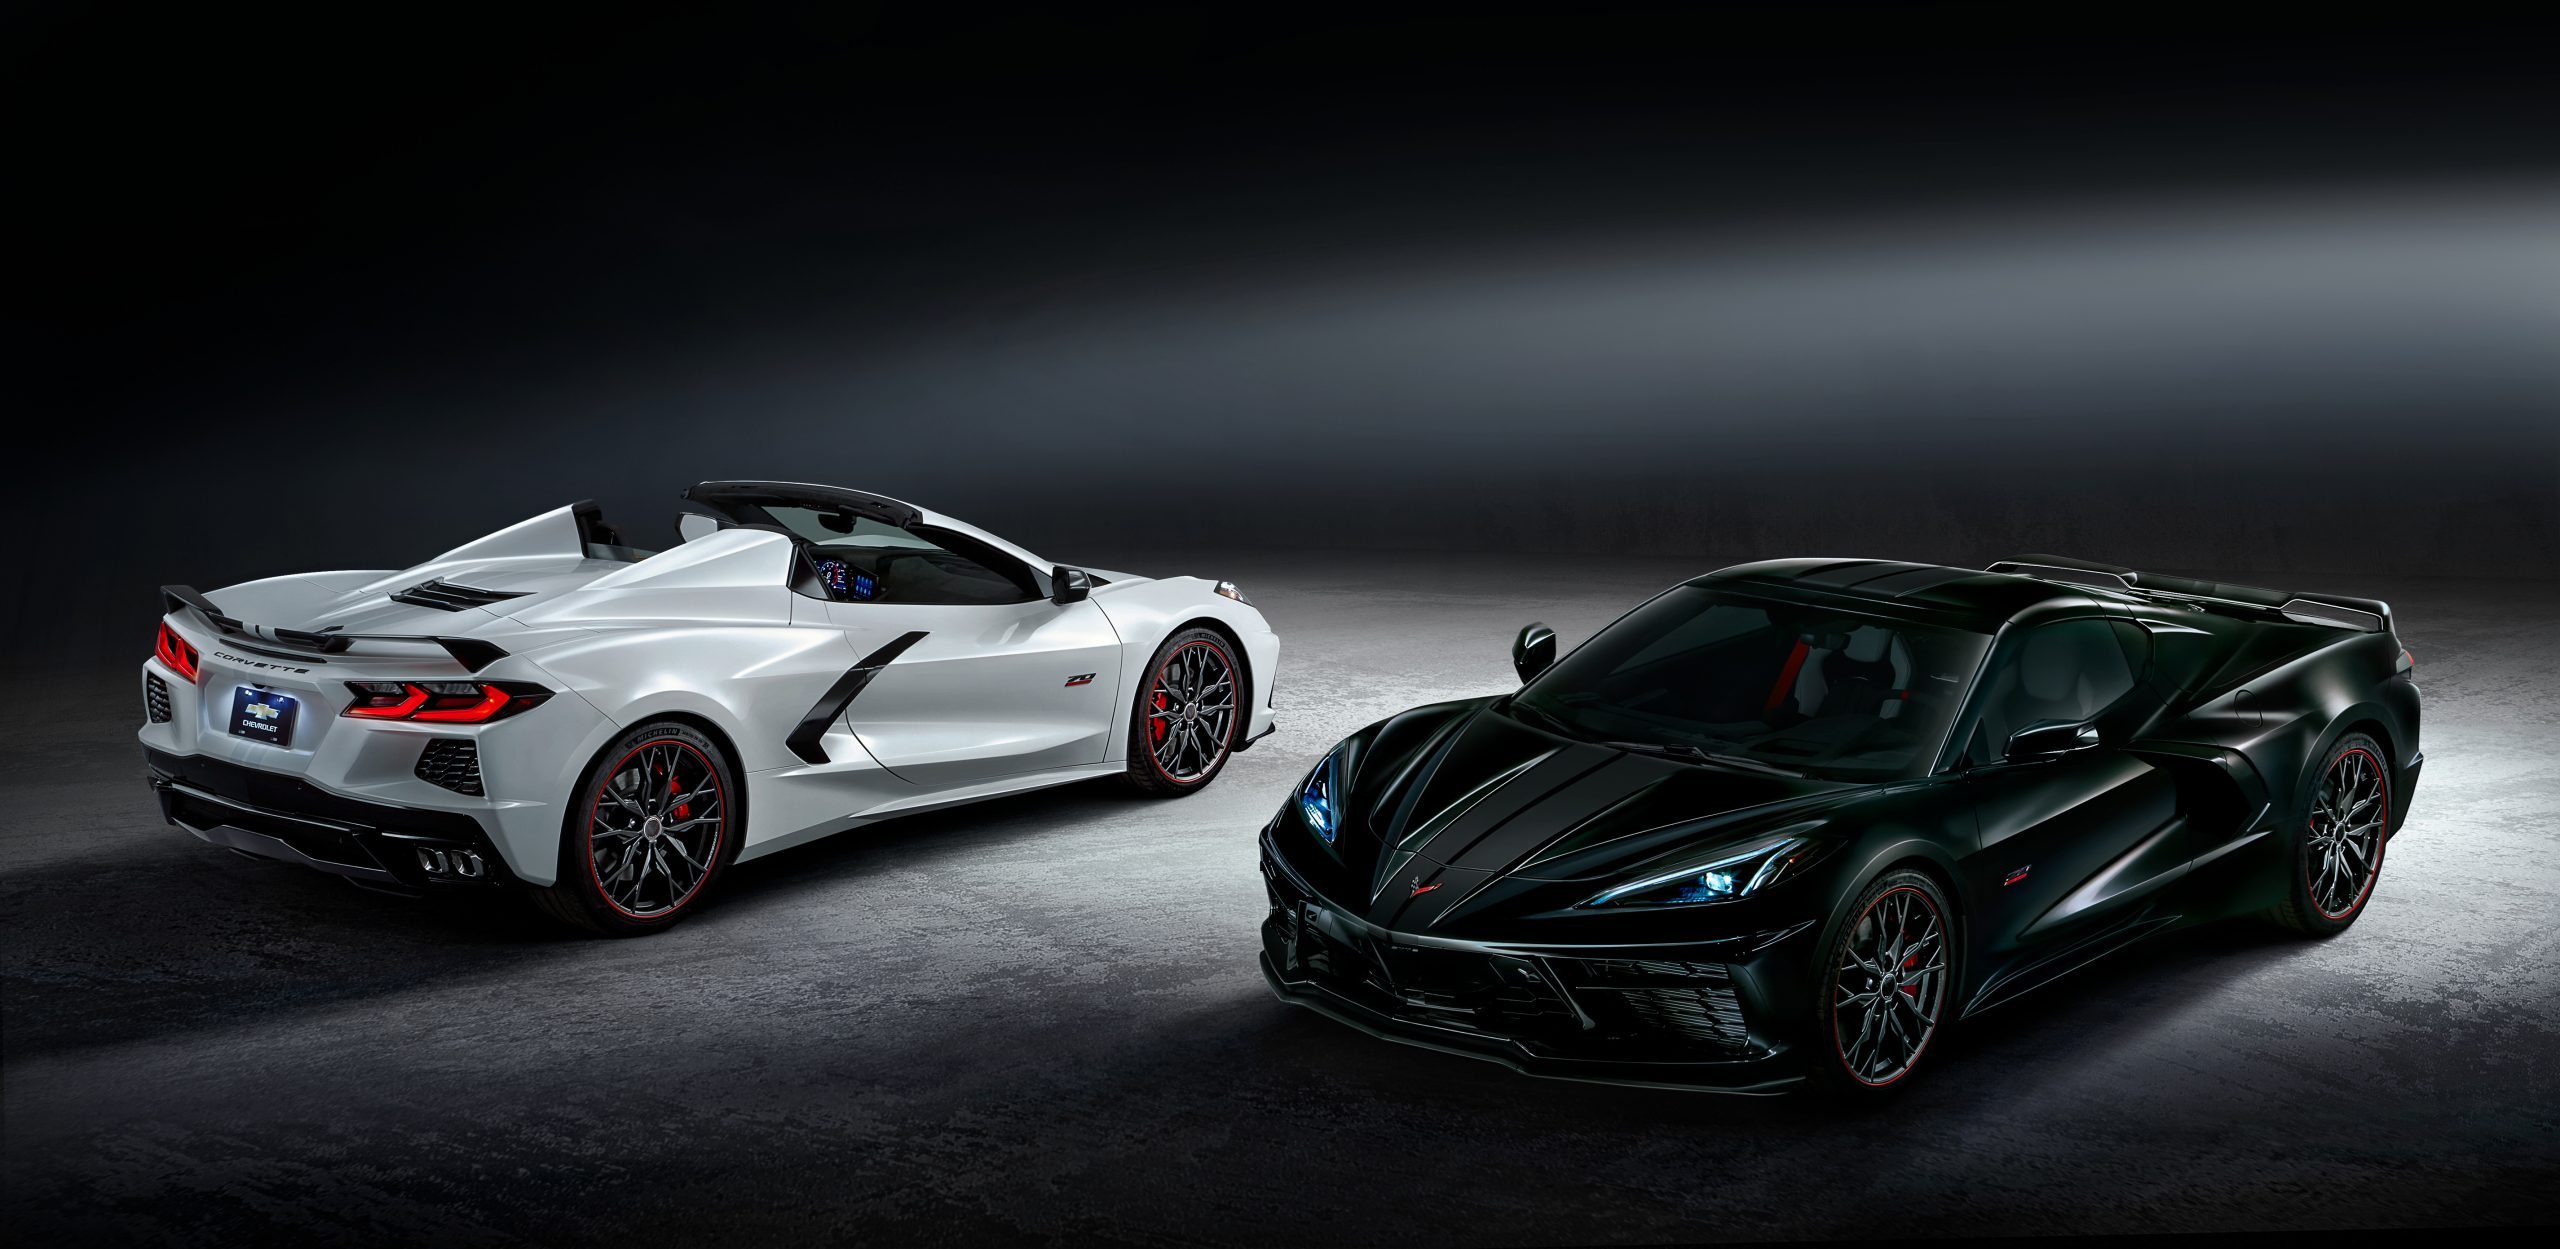 The 2023 Chevrolet Corvette Stingray convertible and coupe finished in White Pearl Metallic Tri-coat and Carbon Flash Metallic, respectively.